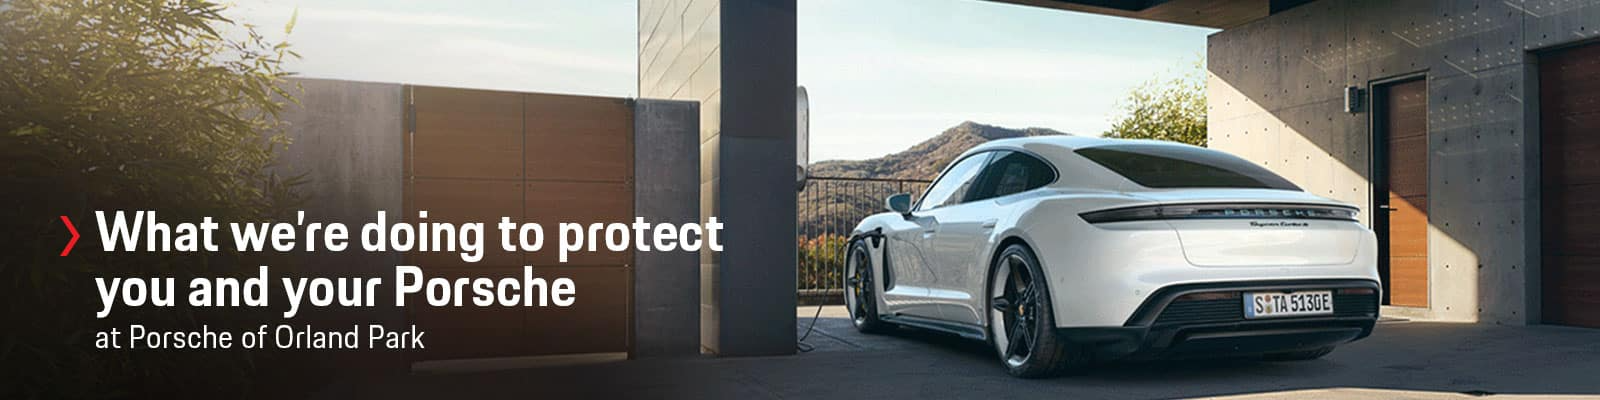 What we're doing to protect you and your Porsche at Porsche of Orland Park